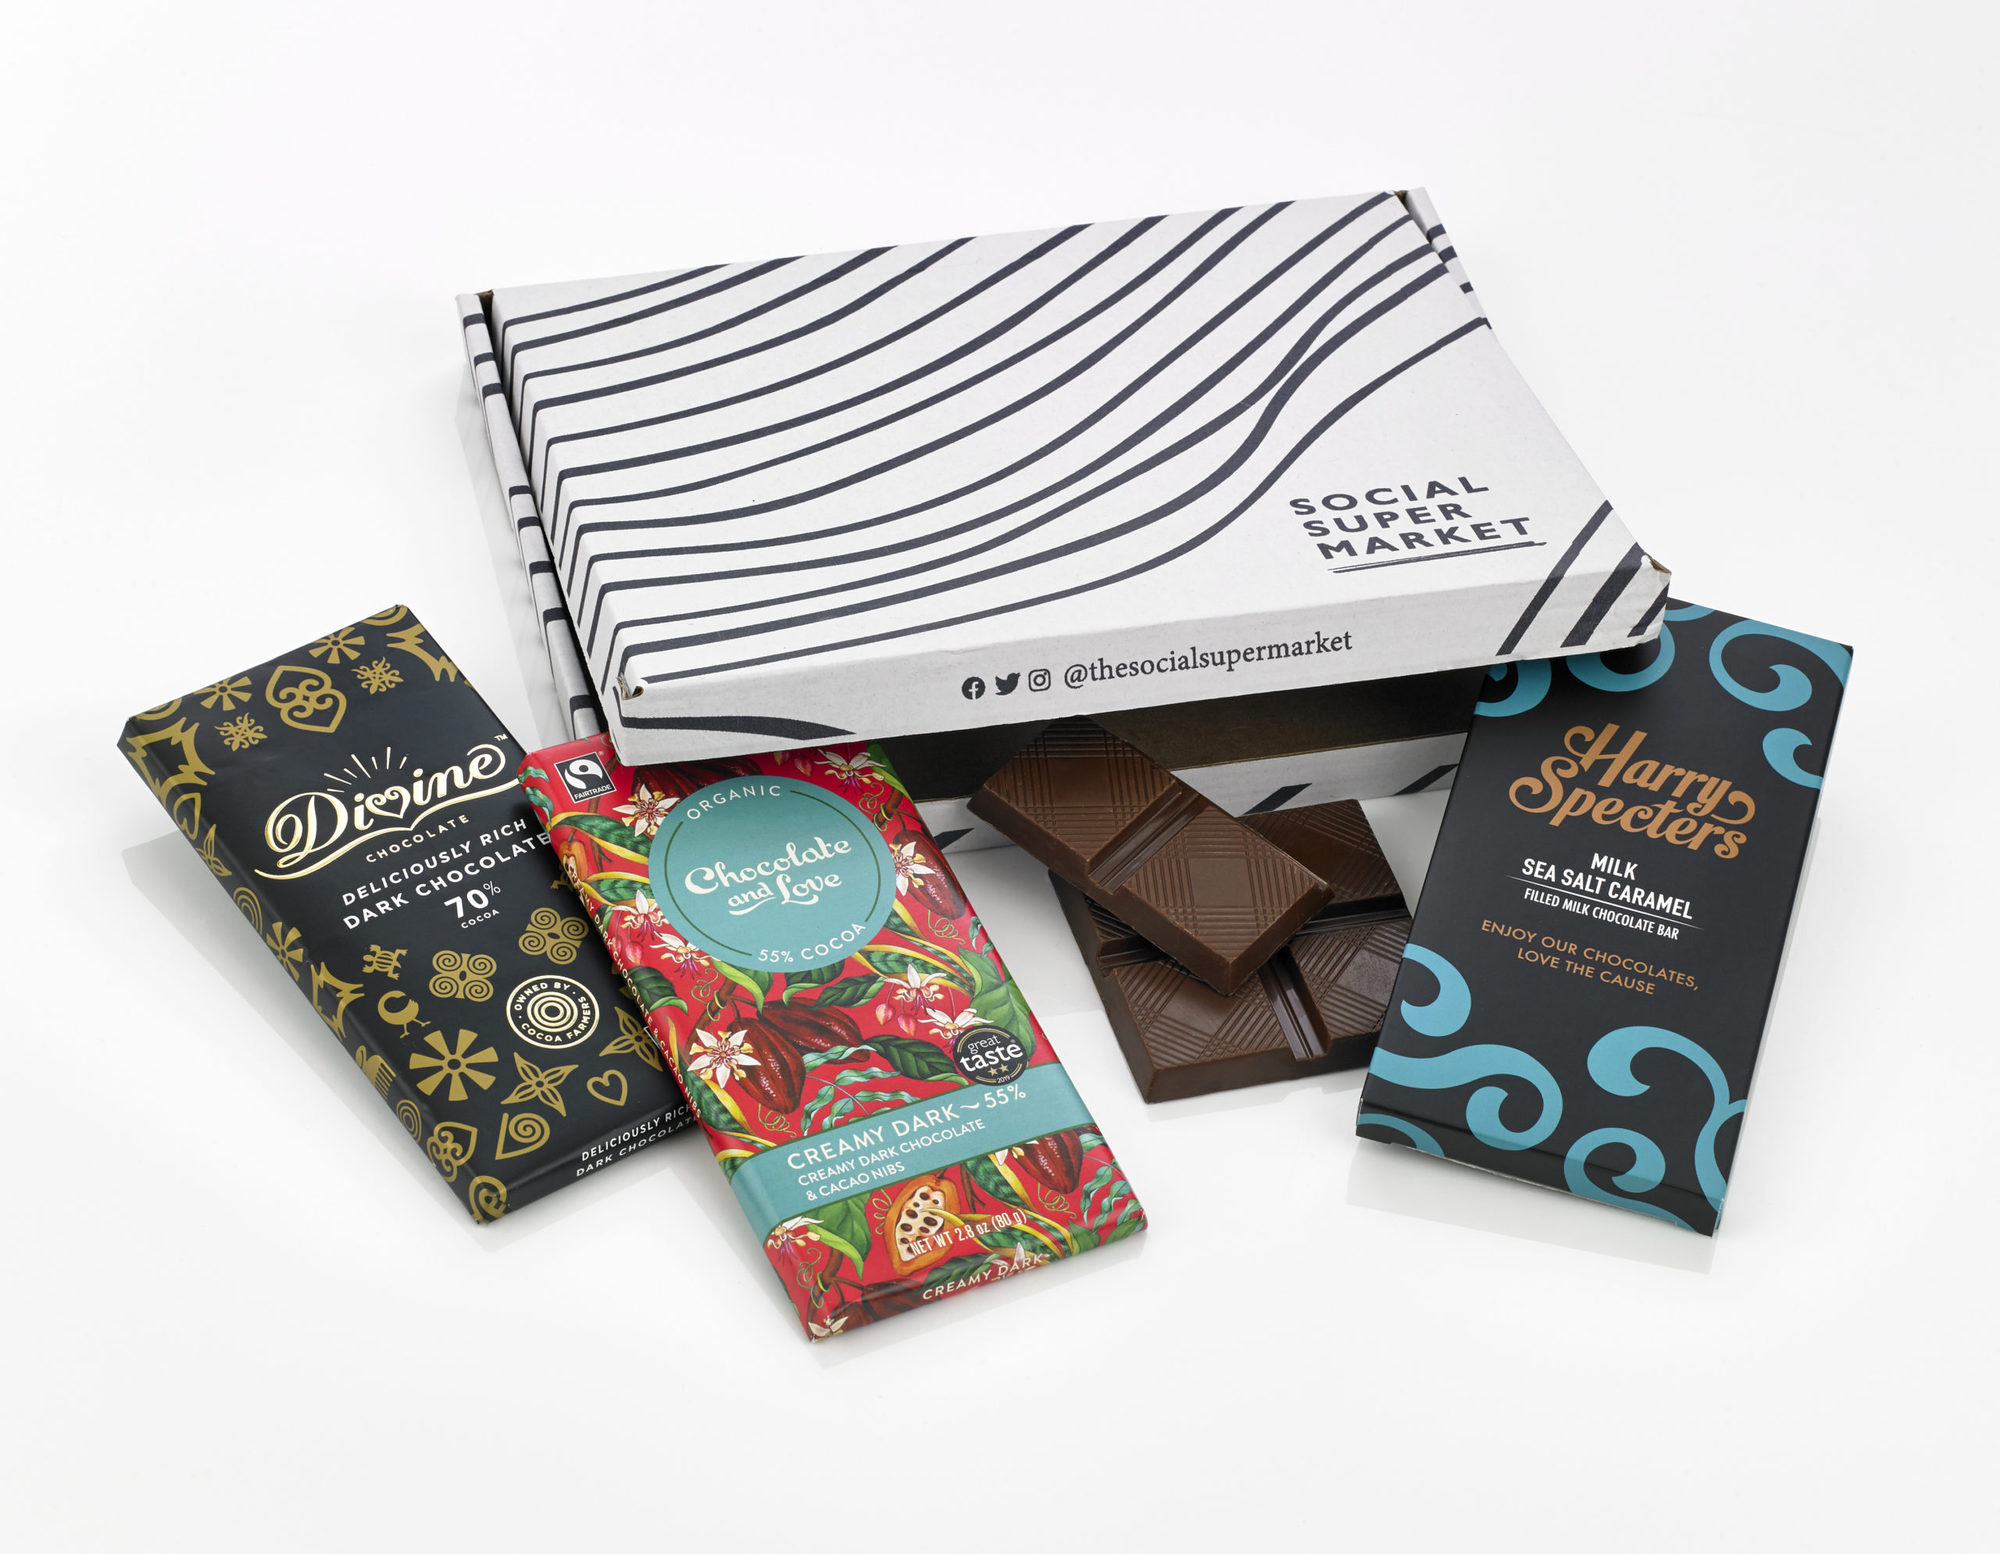 The Chocolate Lover Letterbox Gift